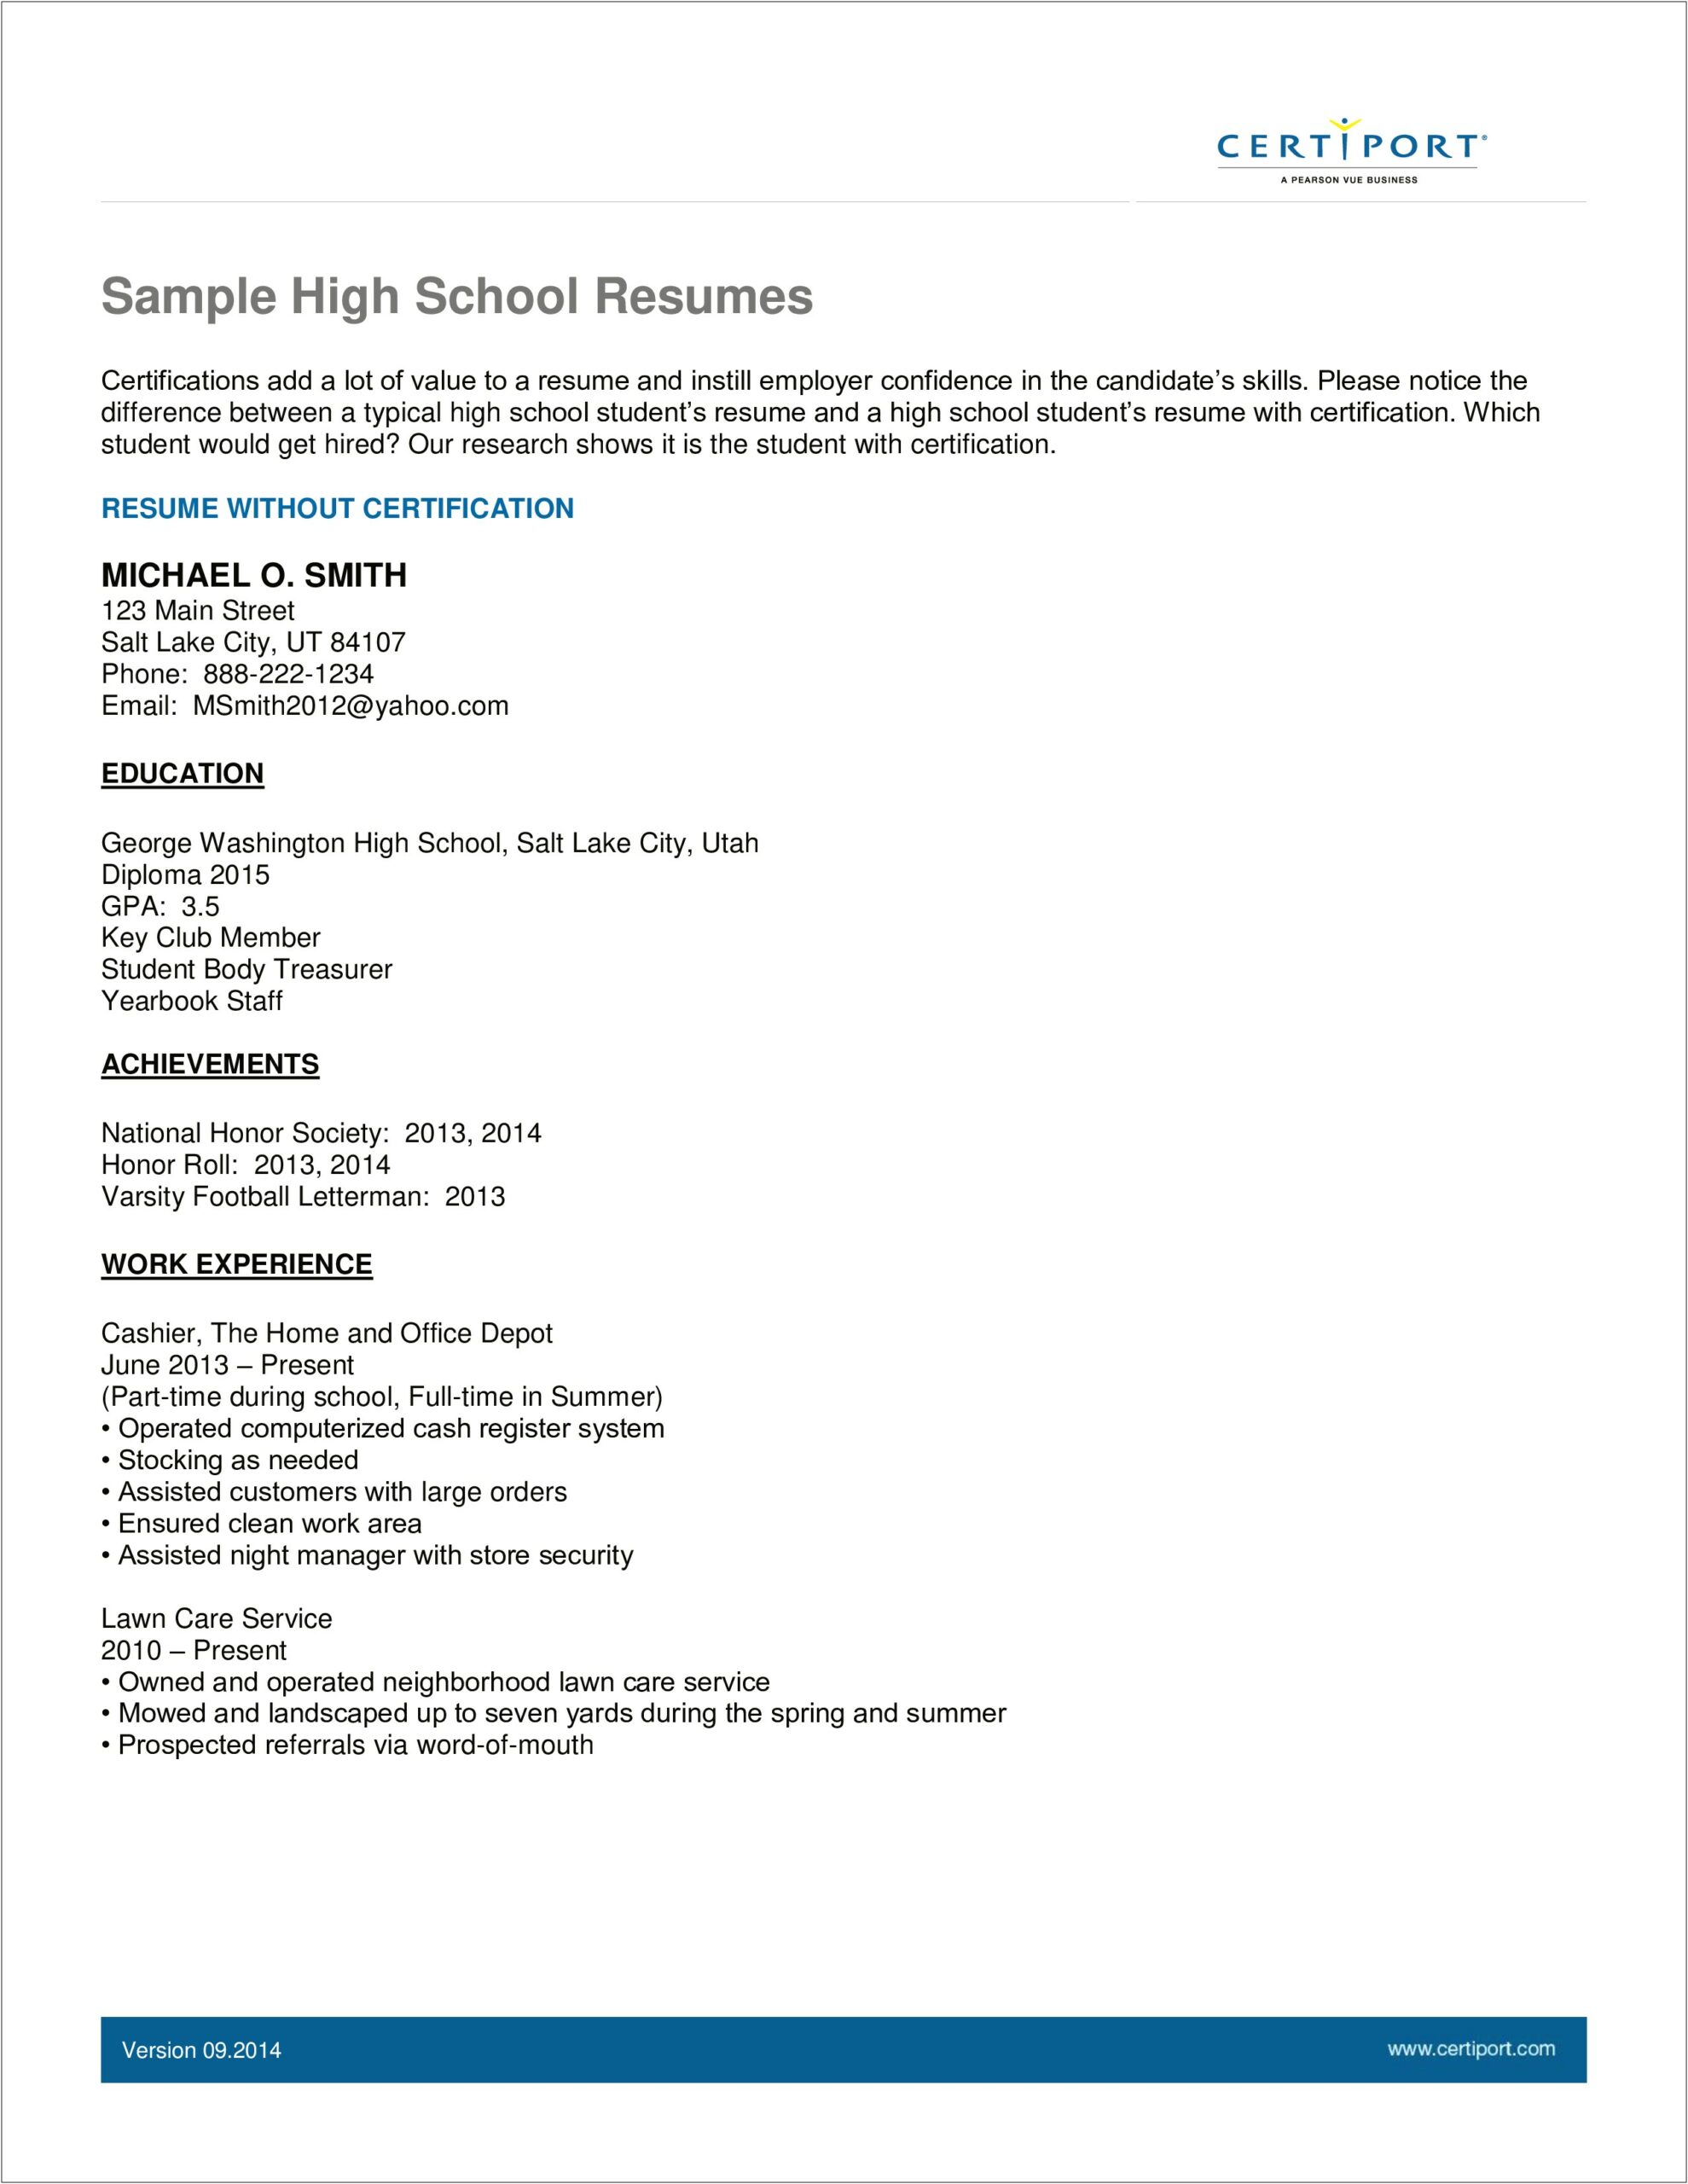 Resume For High School Student Buzz Words